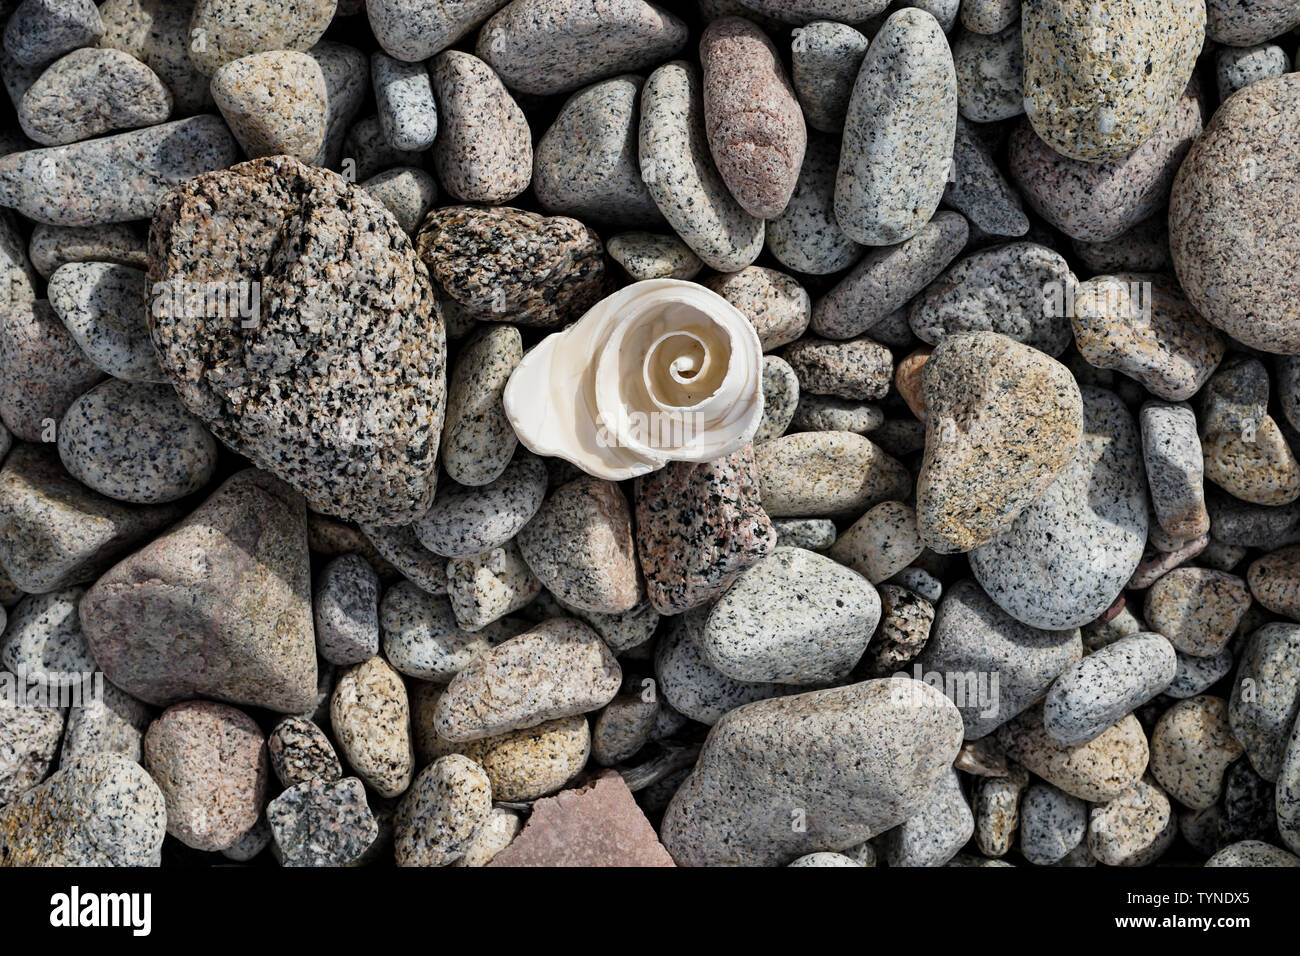 sea shell in the shape of a rose on a stony beach Stock Photo